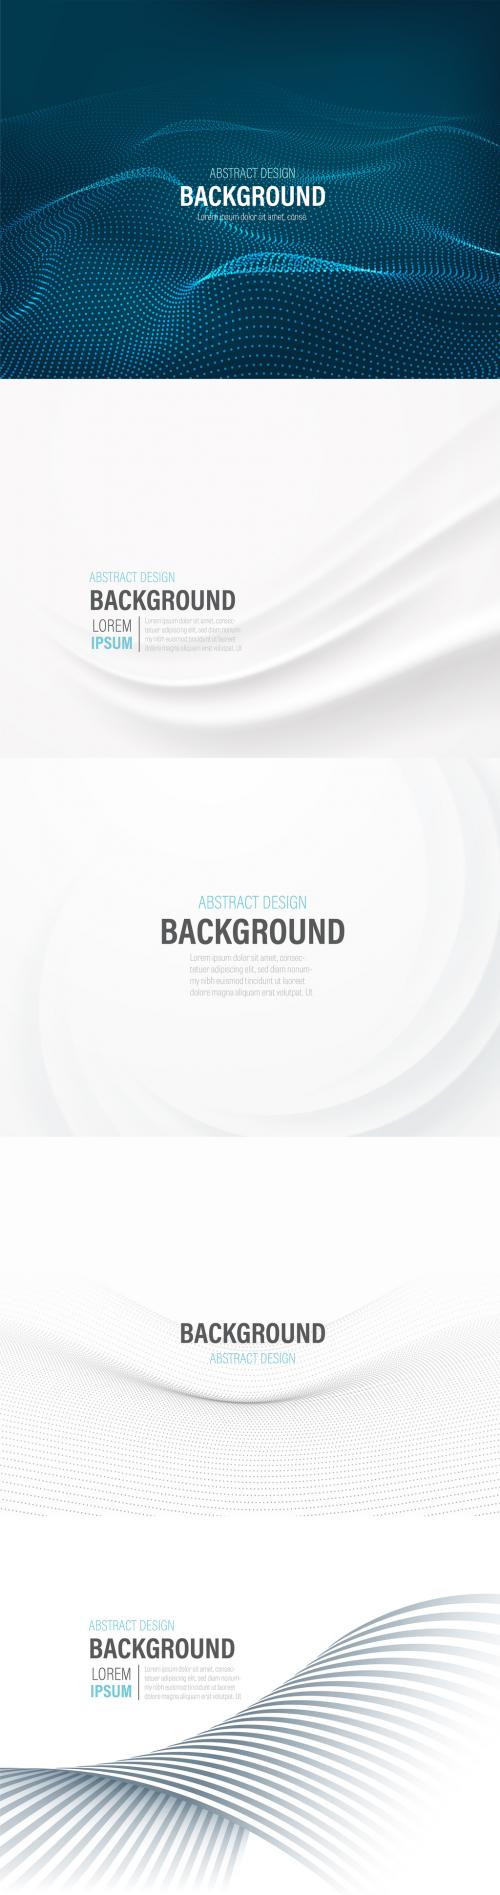 5 Presentation Layouts with Abstract Backgrounds - 198239006